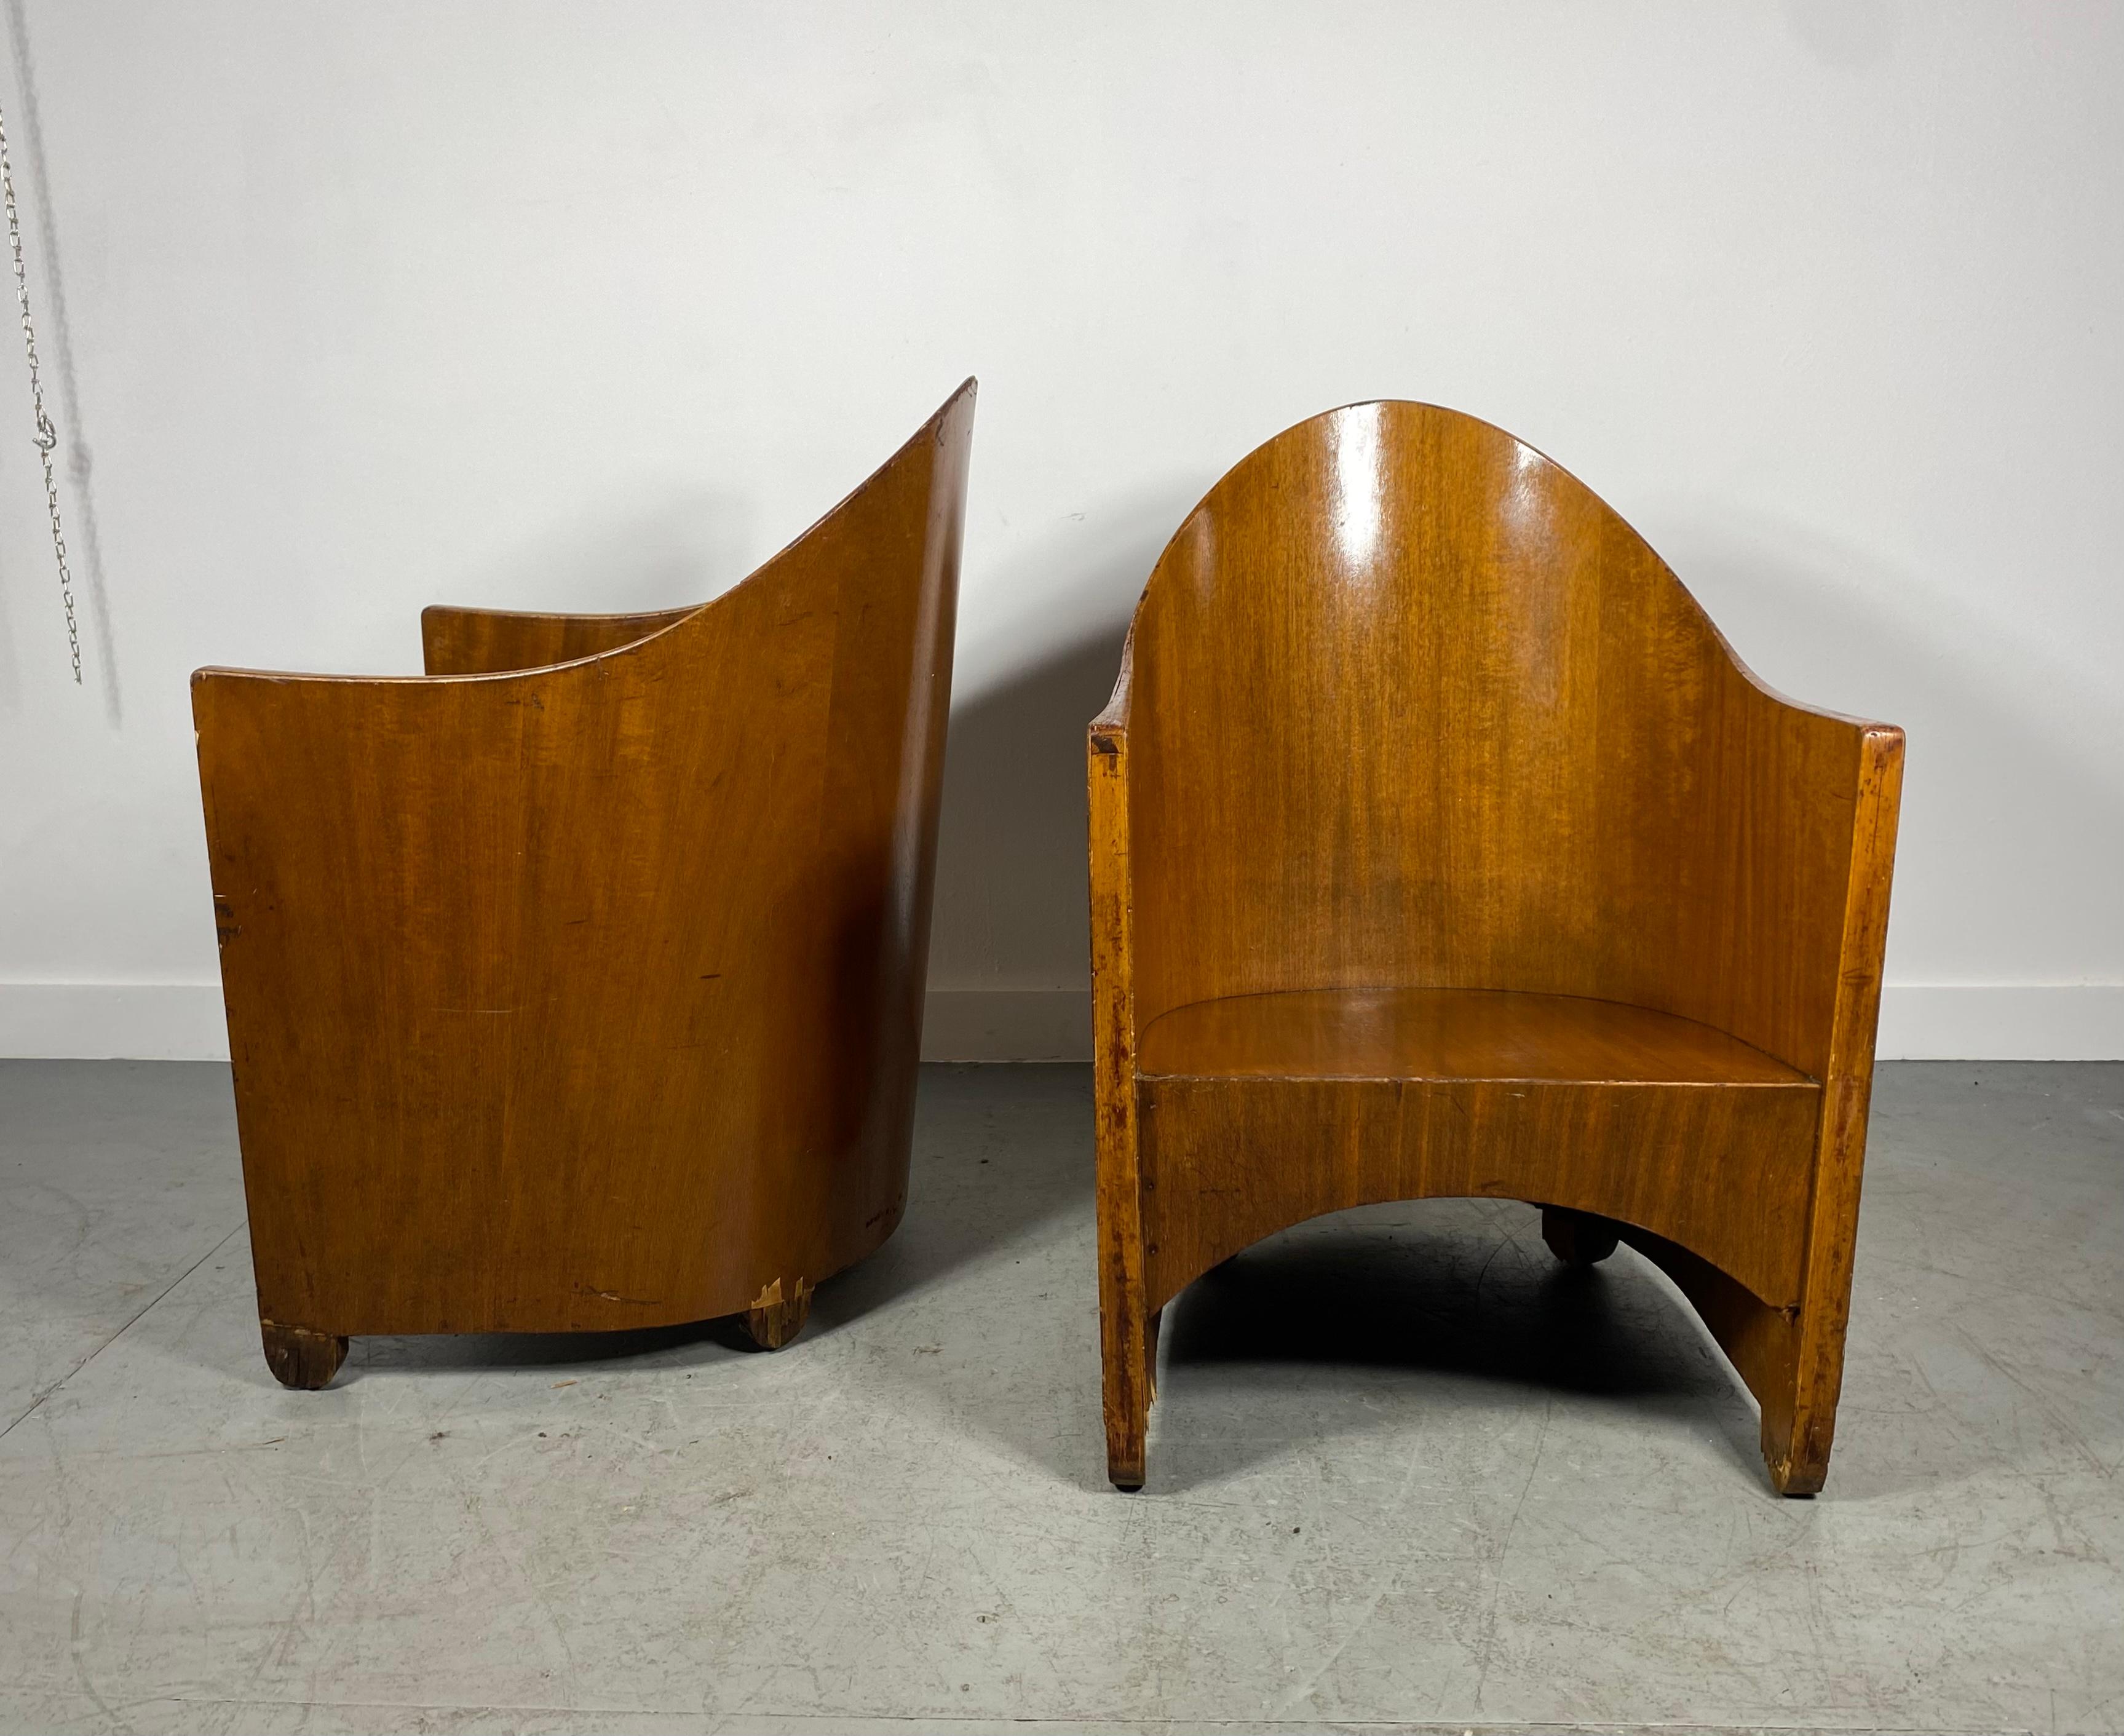 Early 20th Century Rare Pair Modernist Arm Chairs by Walter von Nessen, Art Deco, circa 1929 For Sale